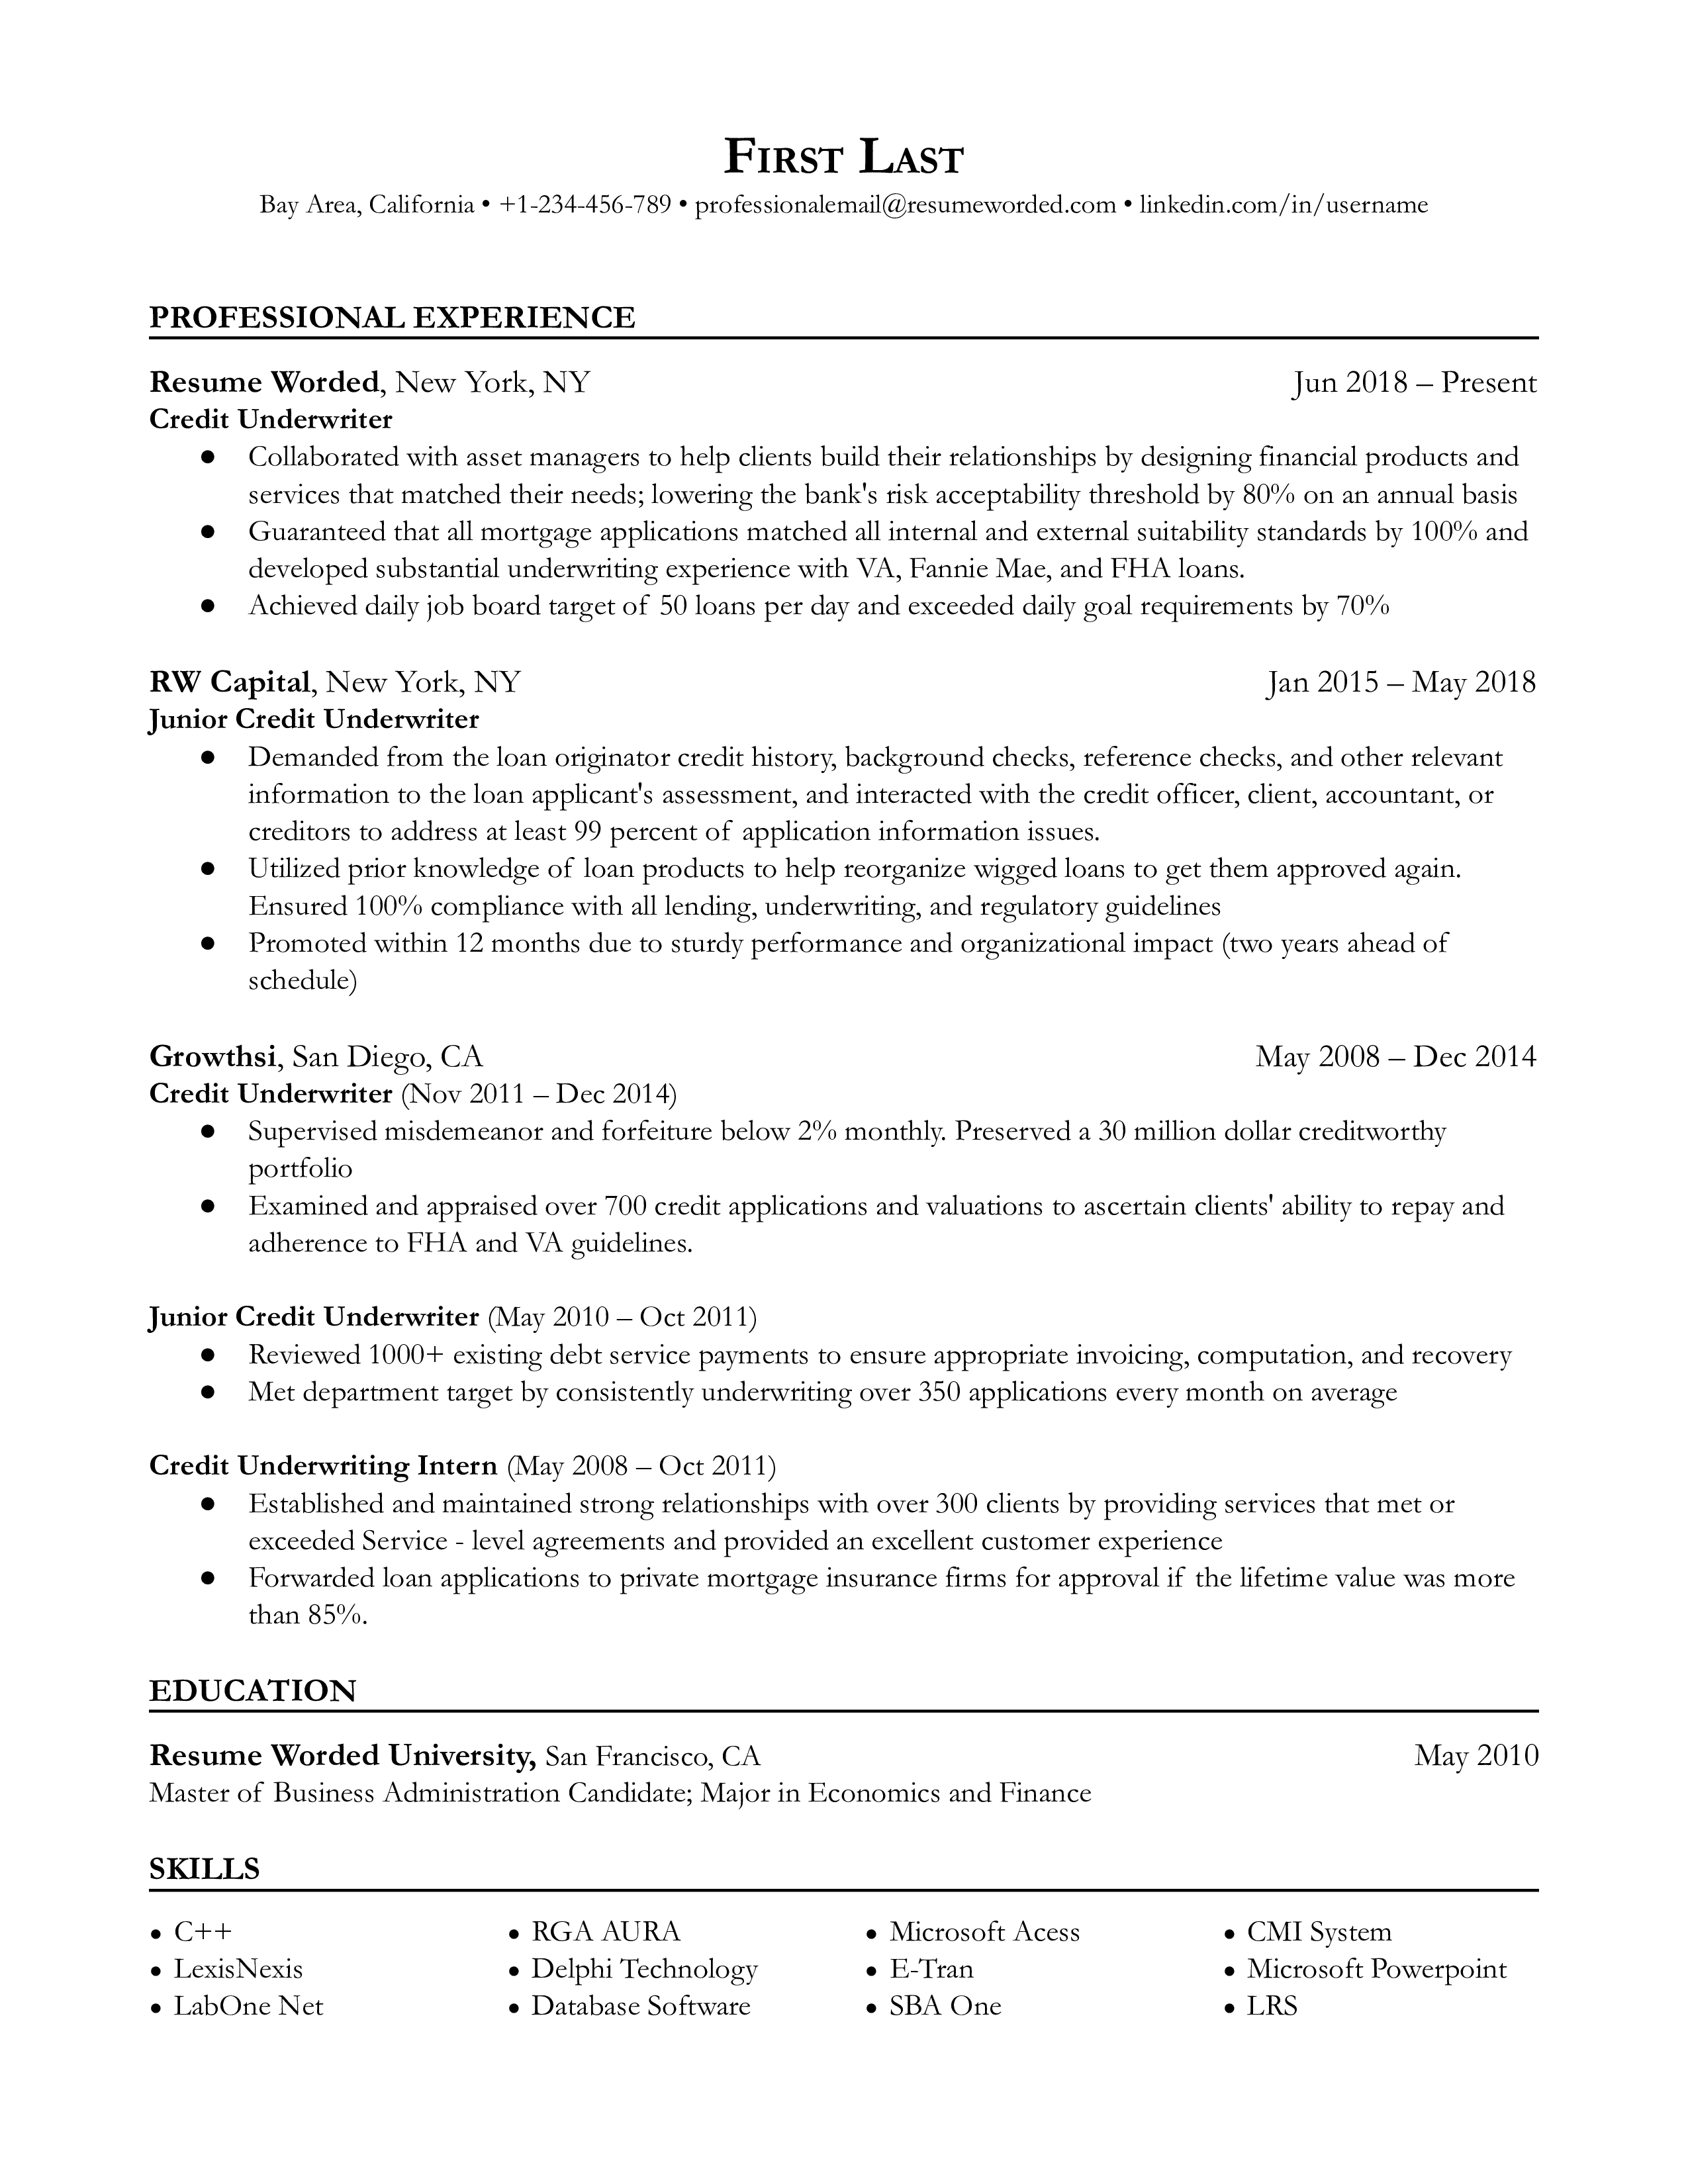 A CV for a Credit Underwriter emphasizing risk assessment and adaptability.